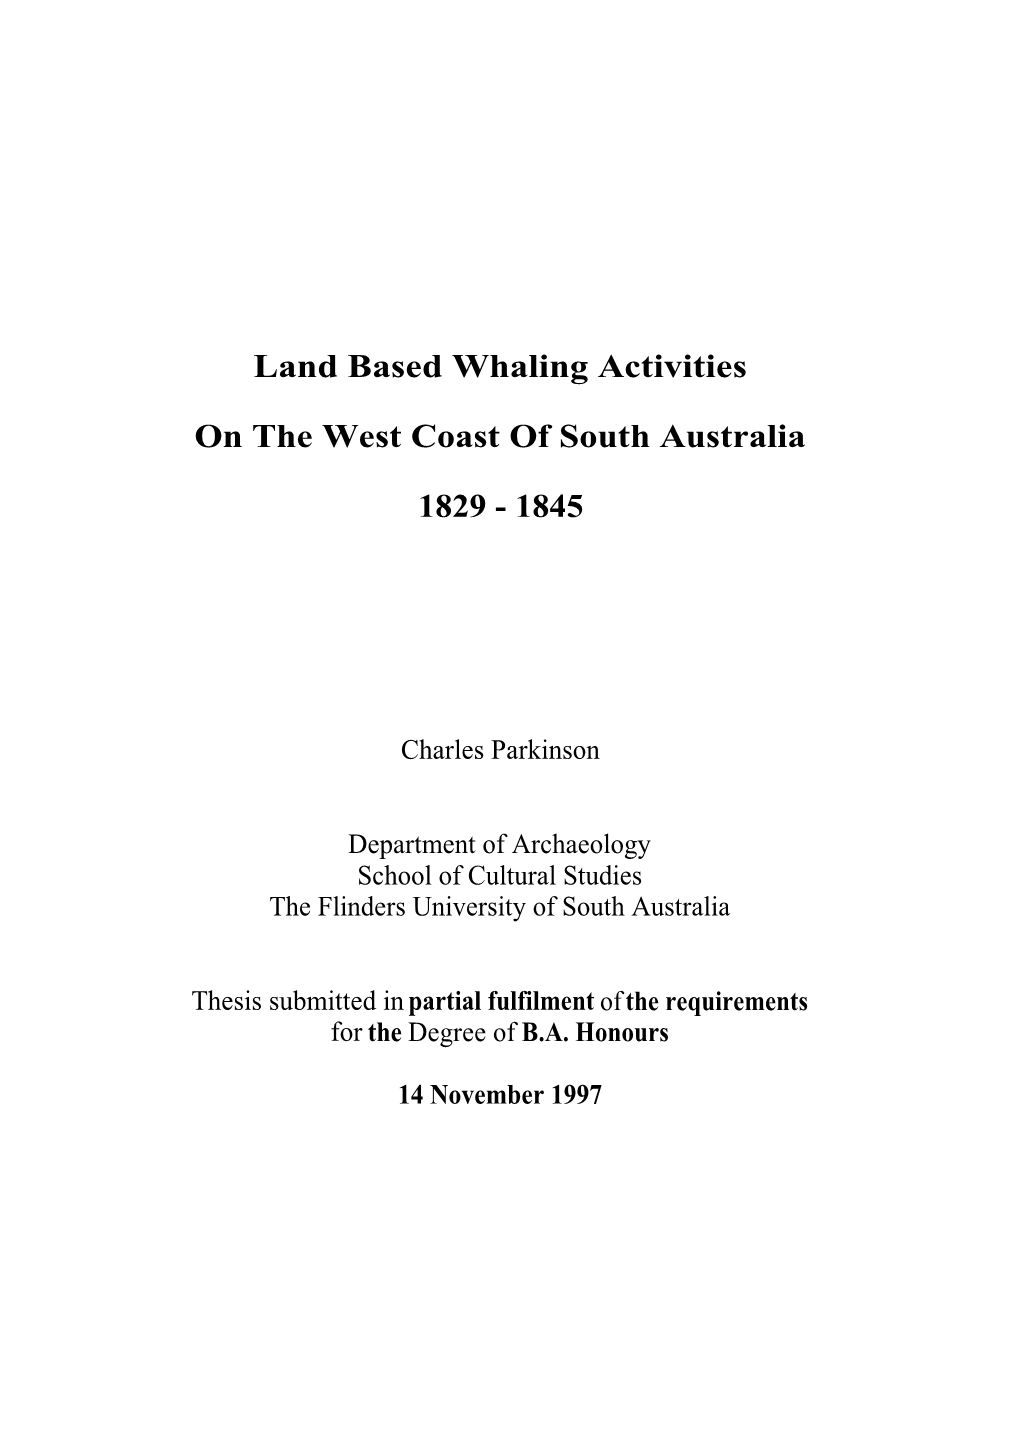 Land Based Whaling Activities on the West Coast of South Australia 1829